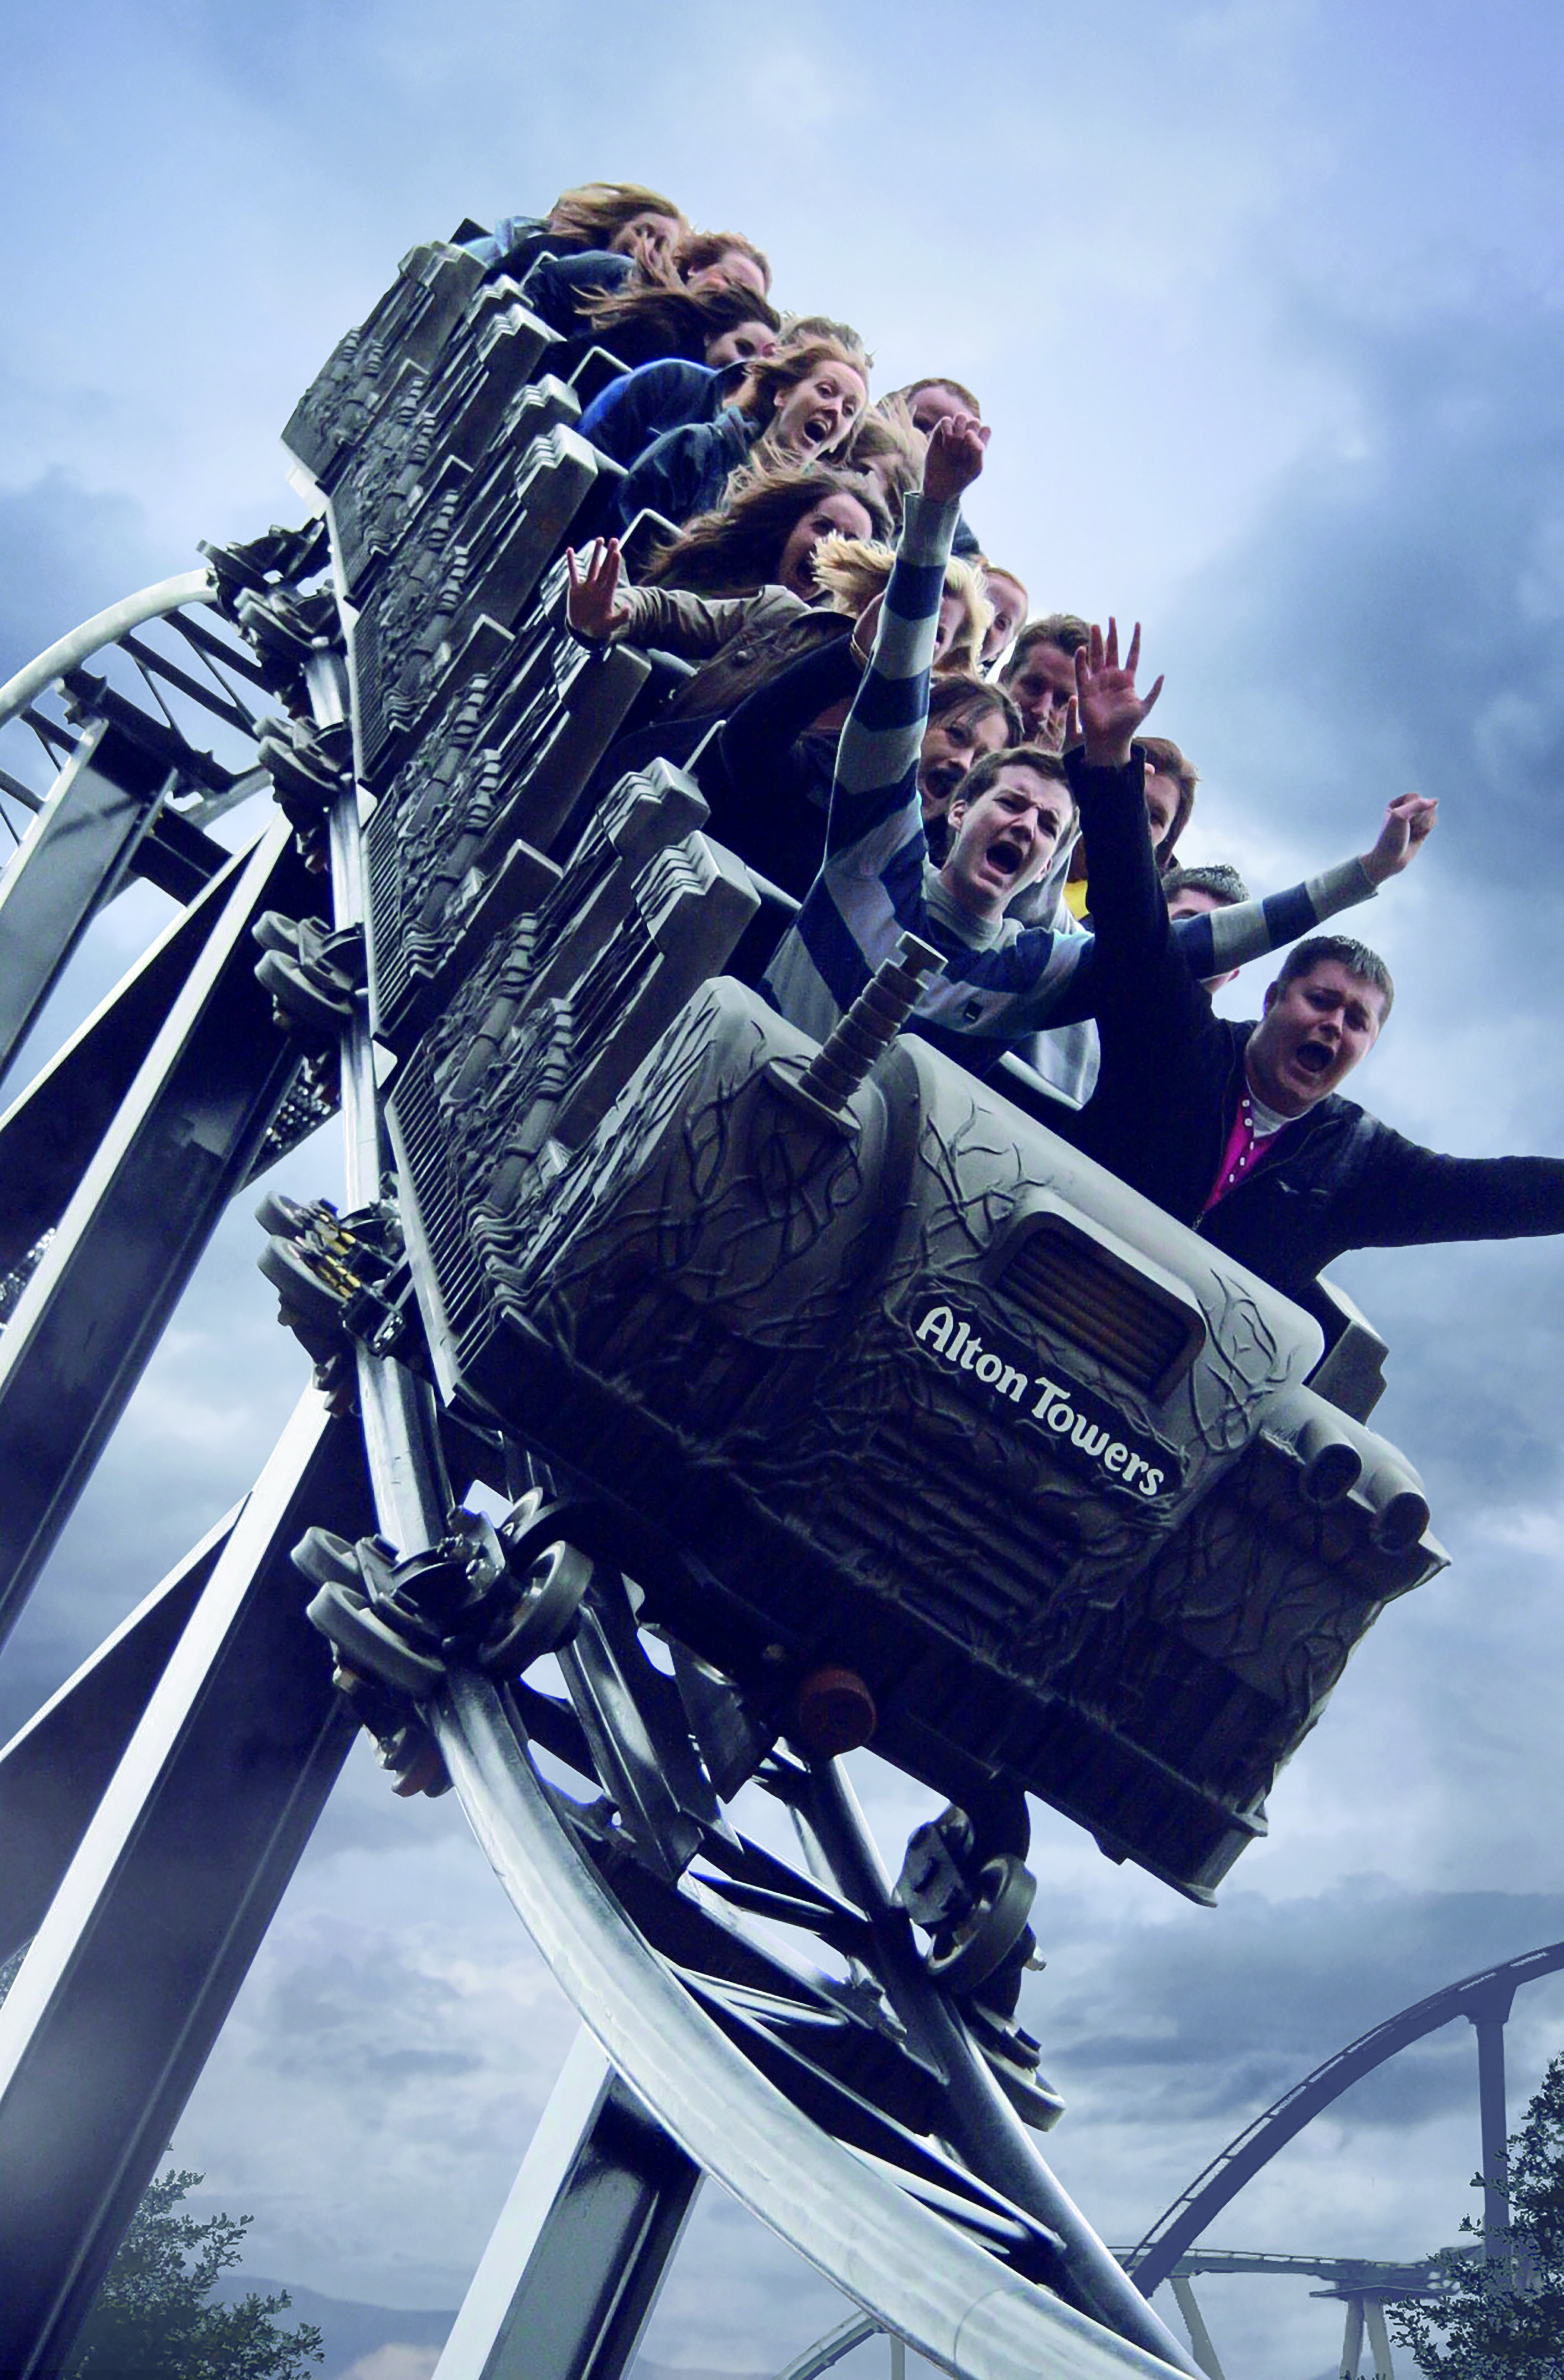 Th13teen Theme Park Ride At Alton Towers Resort